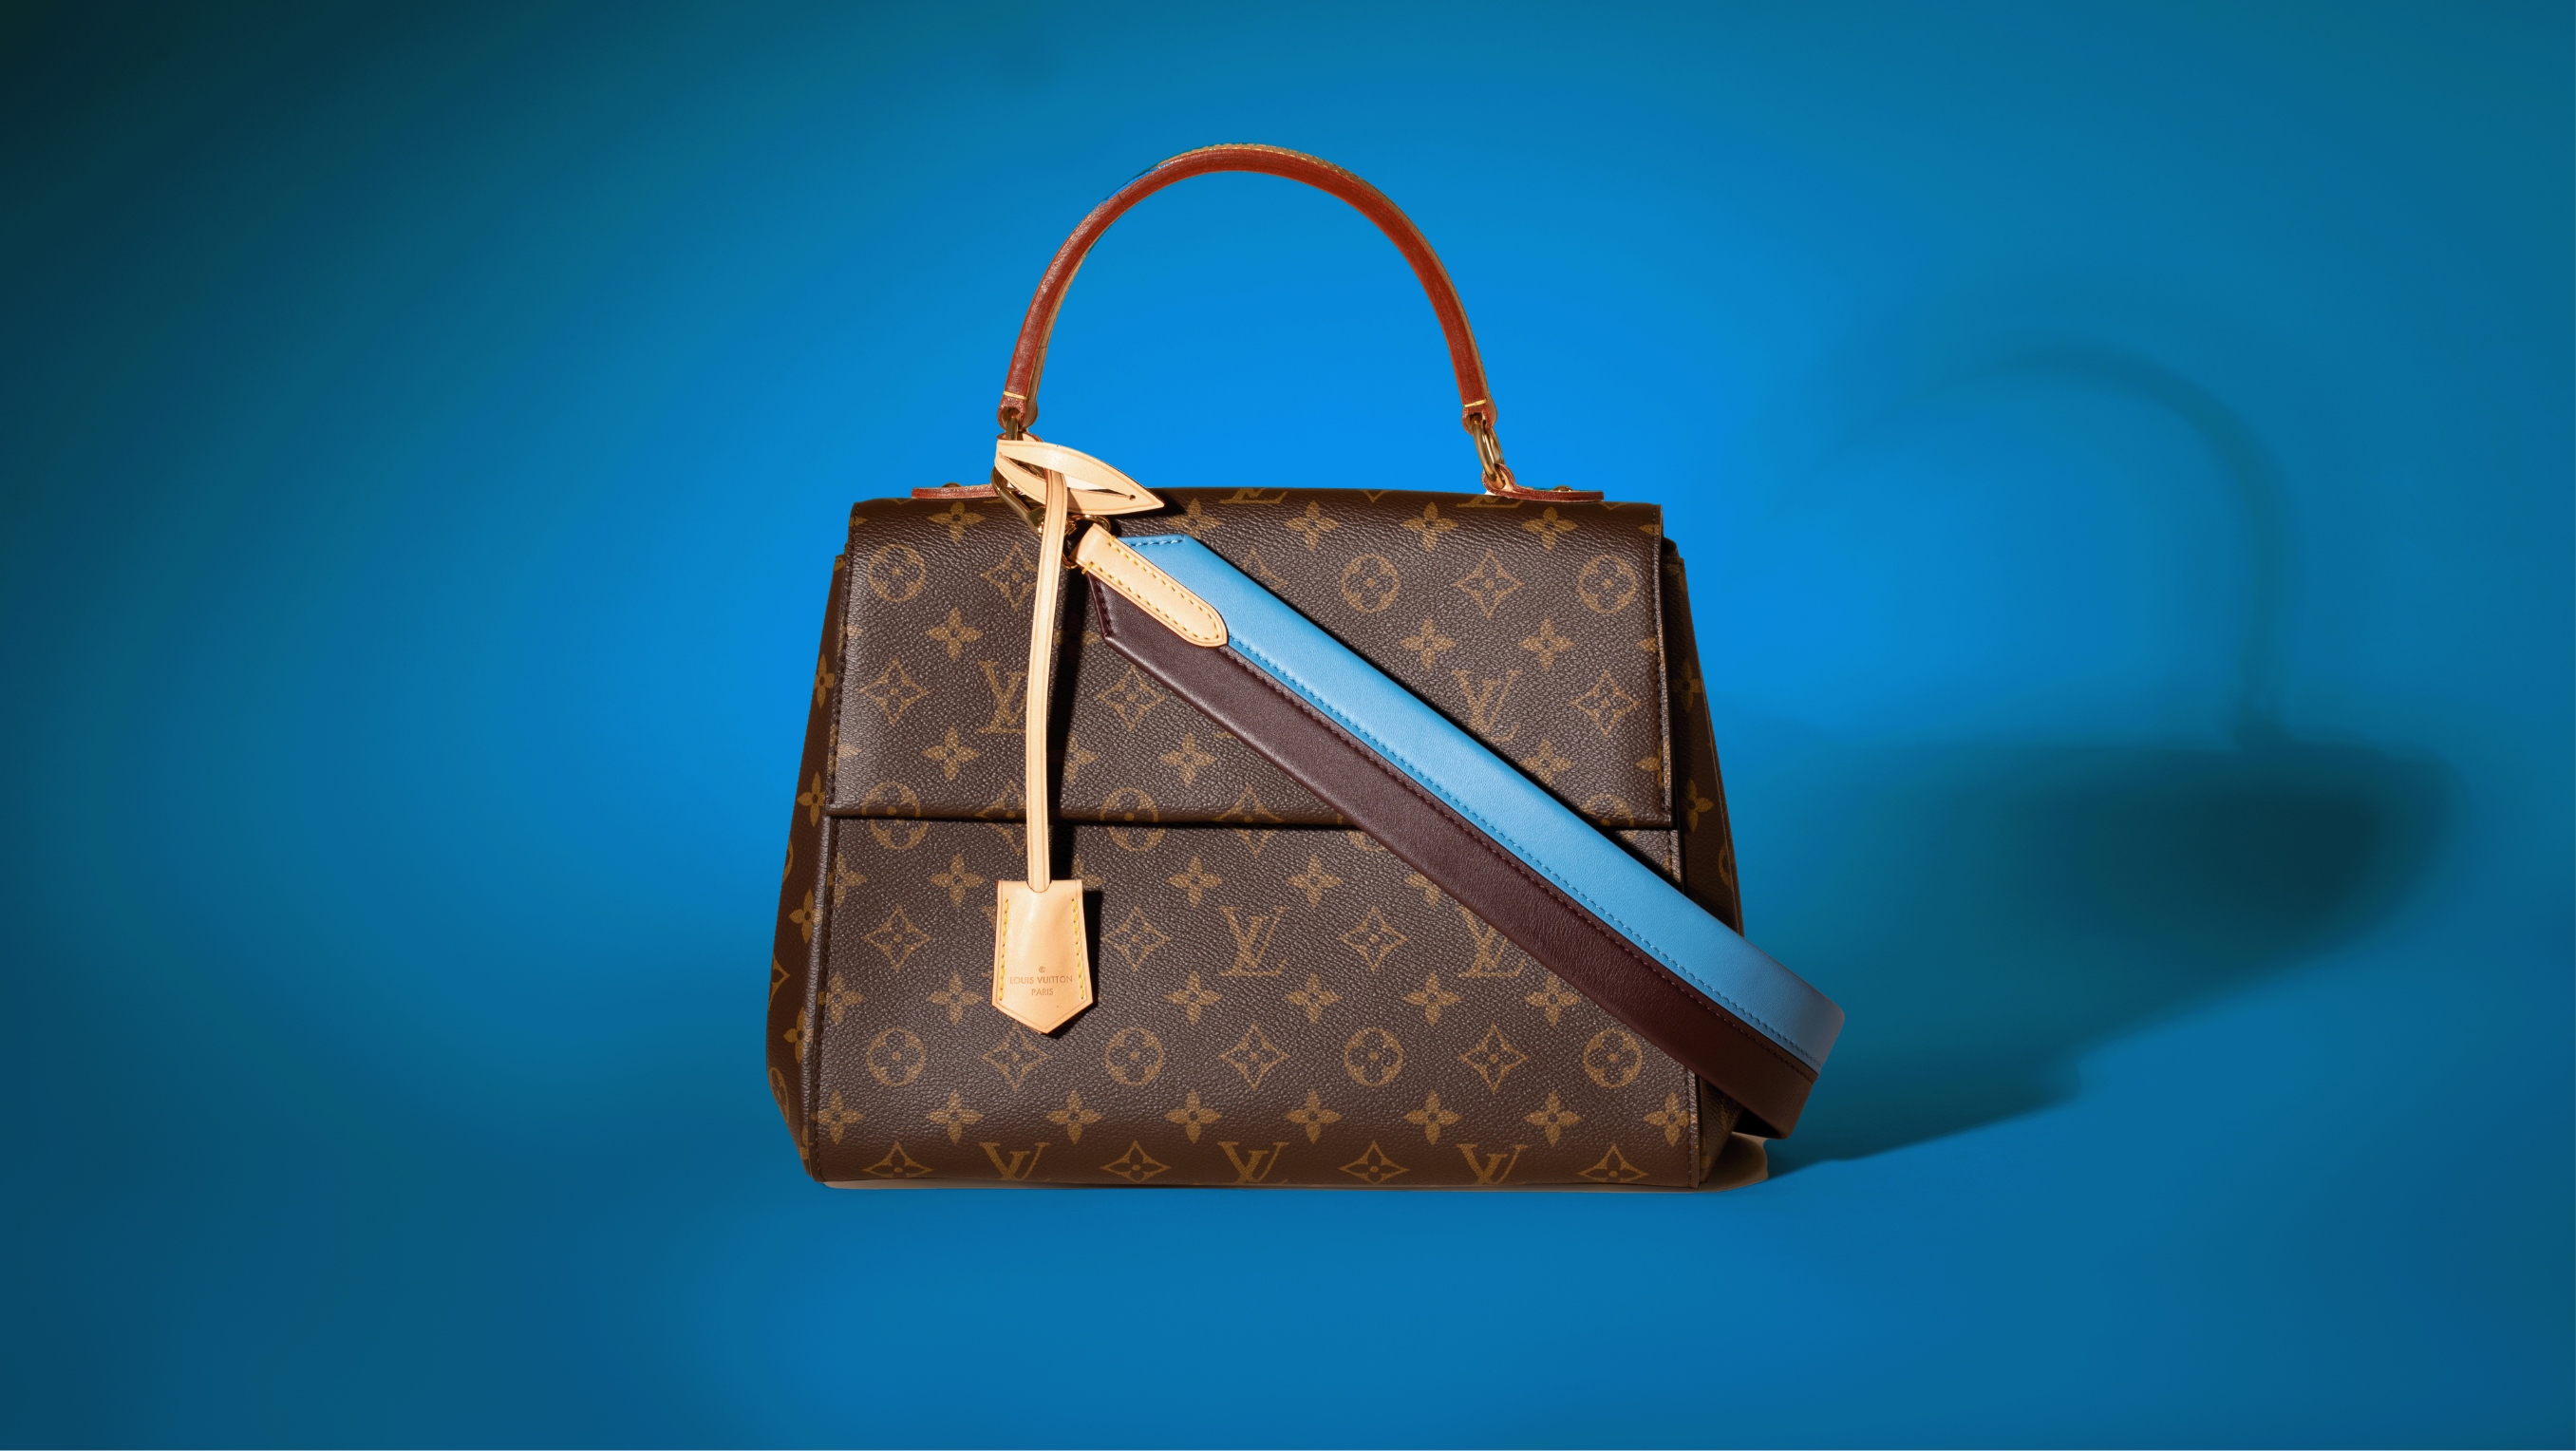 Louis Vuitton's Beloved 'Since 1854' Collection Now Comes In A New